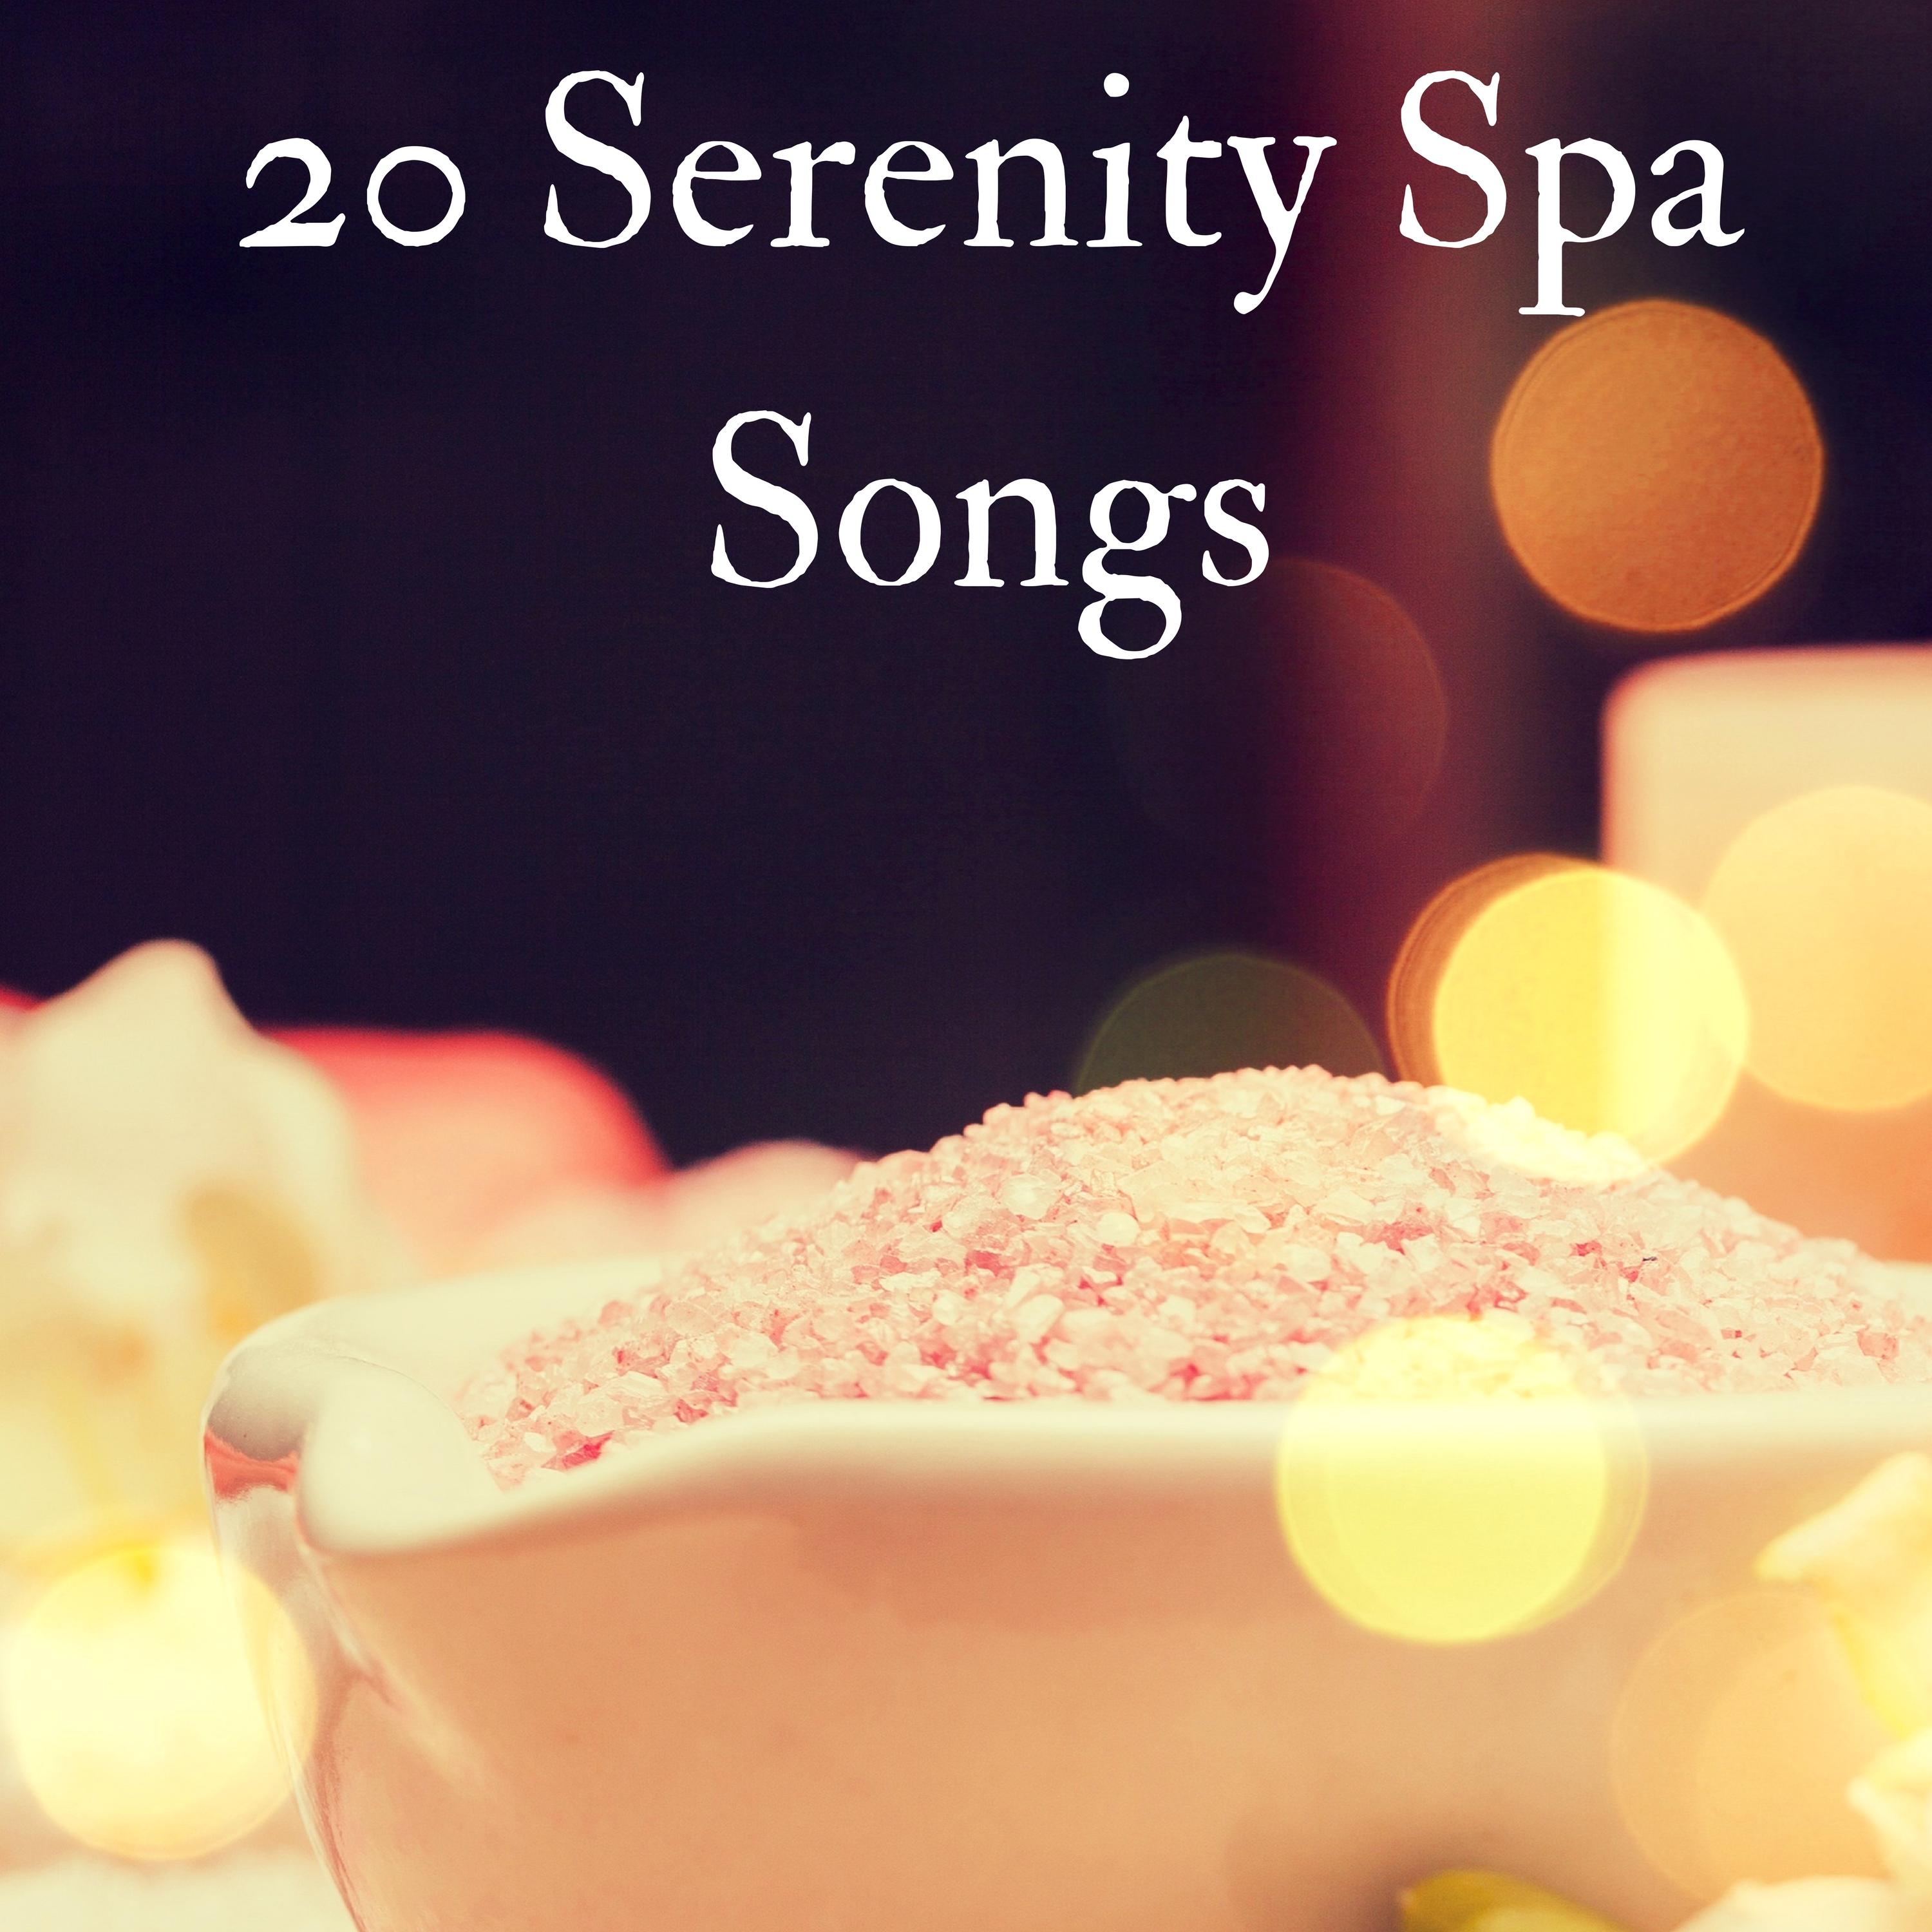 20 Serenity Spa Songs - The Best Massage Music of 2017, Calming Background Sounds of Nature